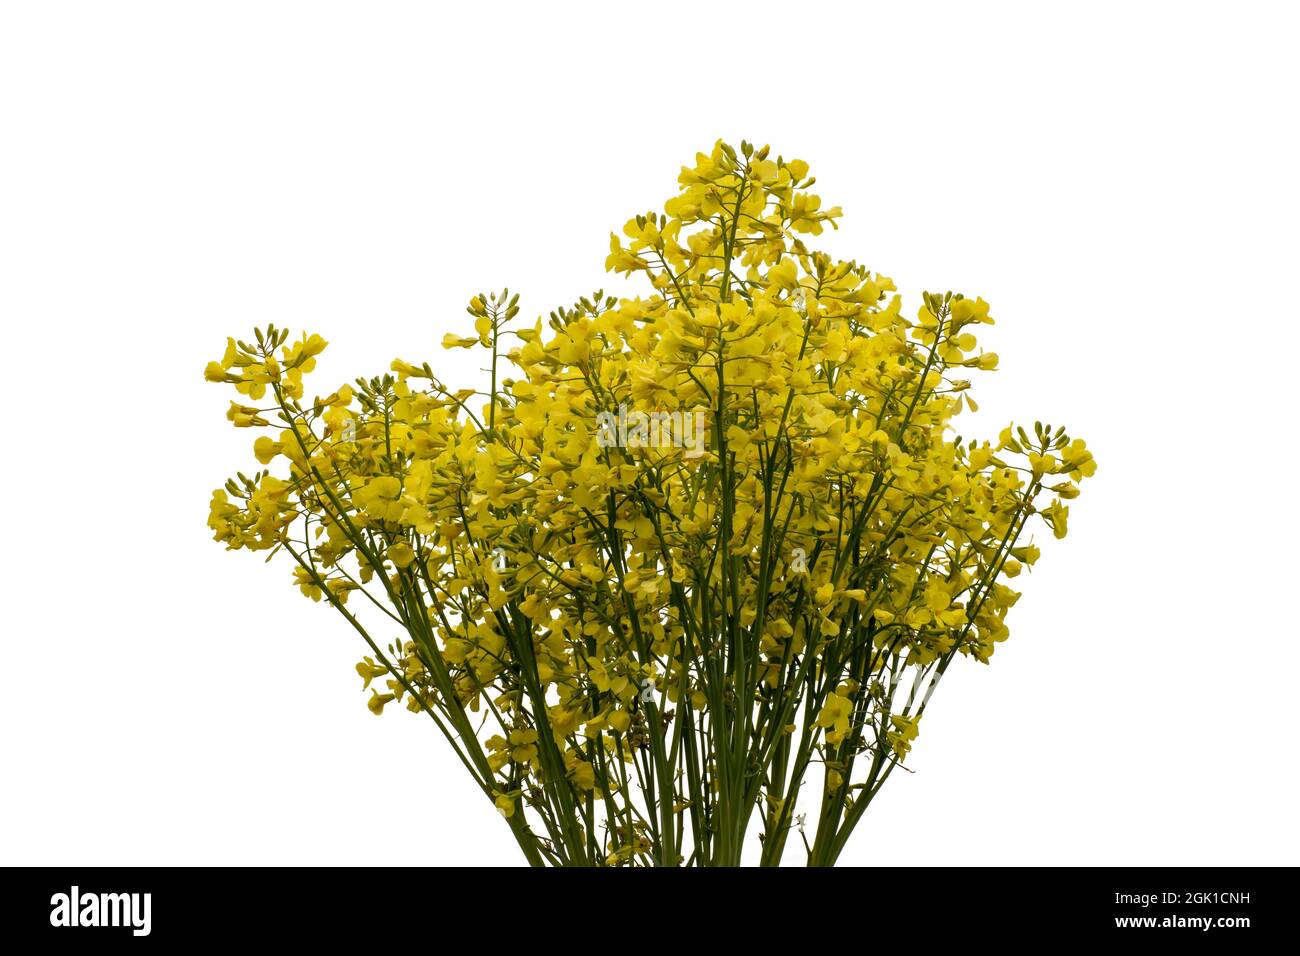 Blooming broccoli cabbage with yellow flowers. Isolated on white background Stock Photo